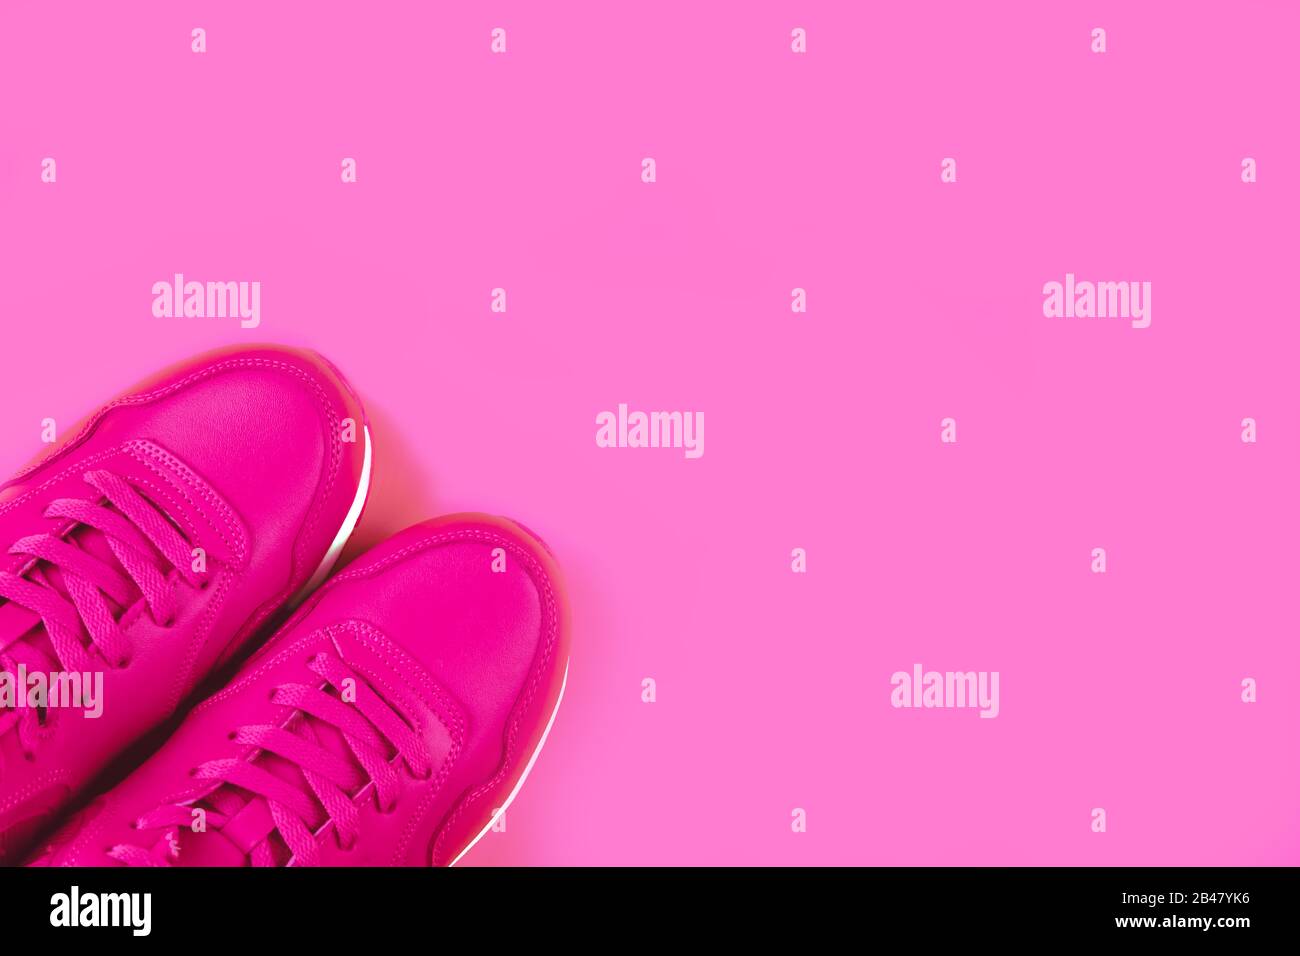 Bright pink sneakers on pink background. Concept of woman sport and healthy lifestyle in monochrome. Place for text, flat lay, top view. Stock Photo